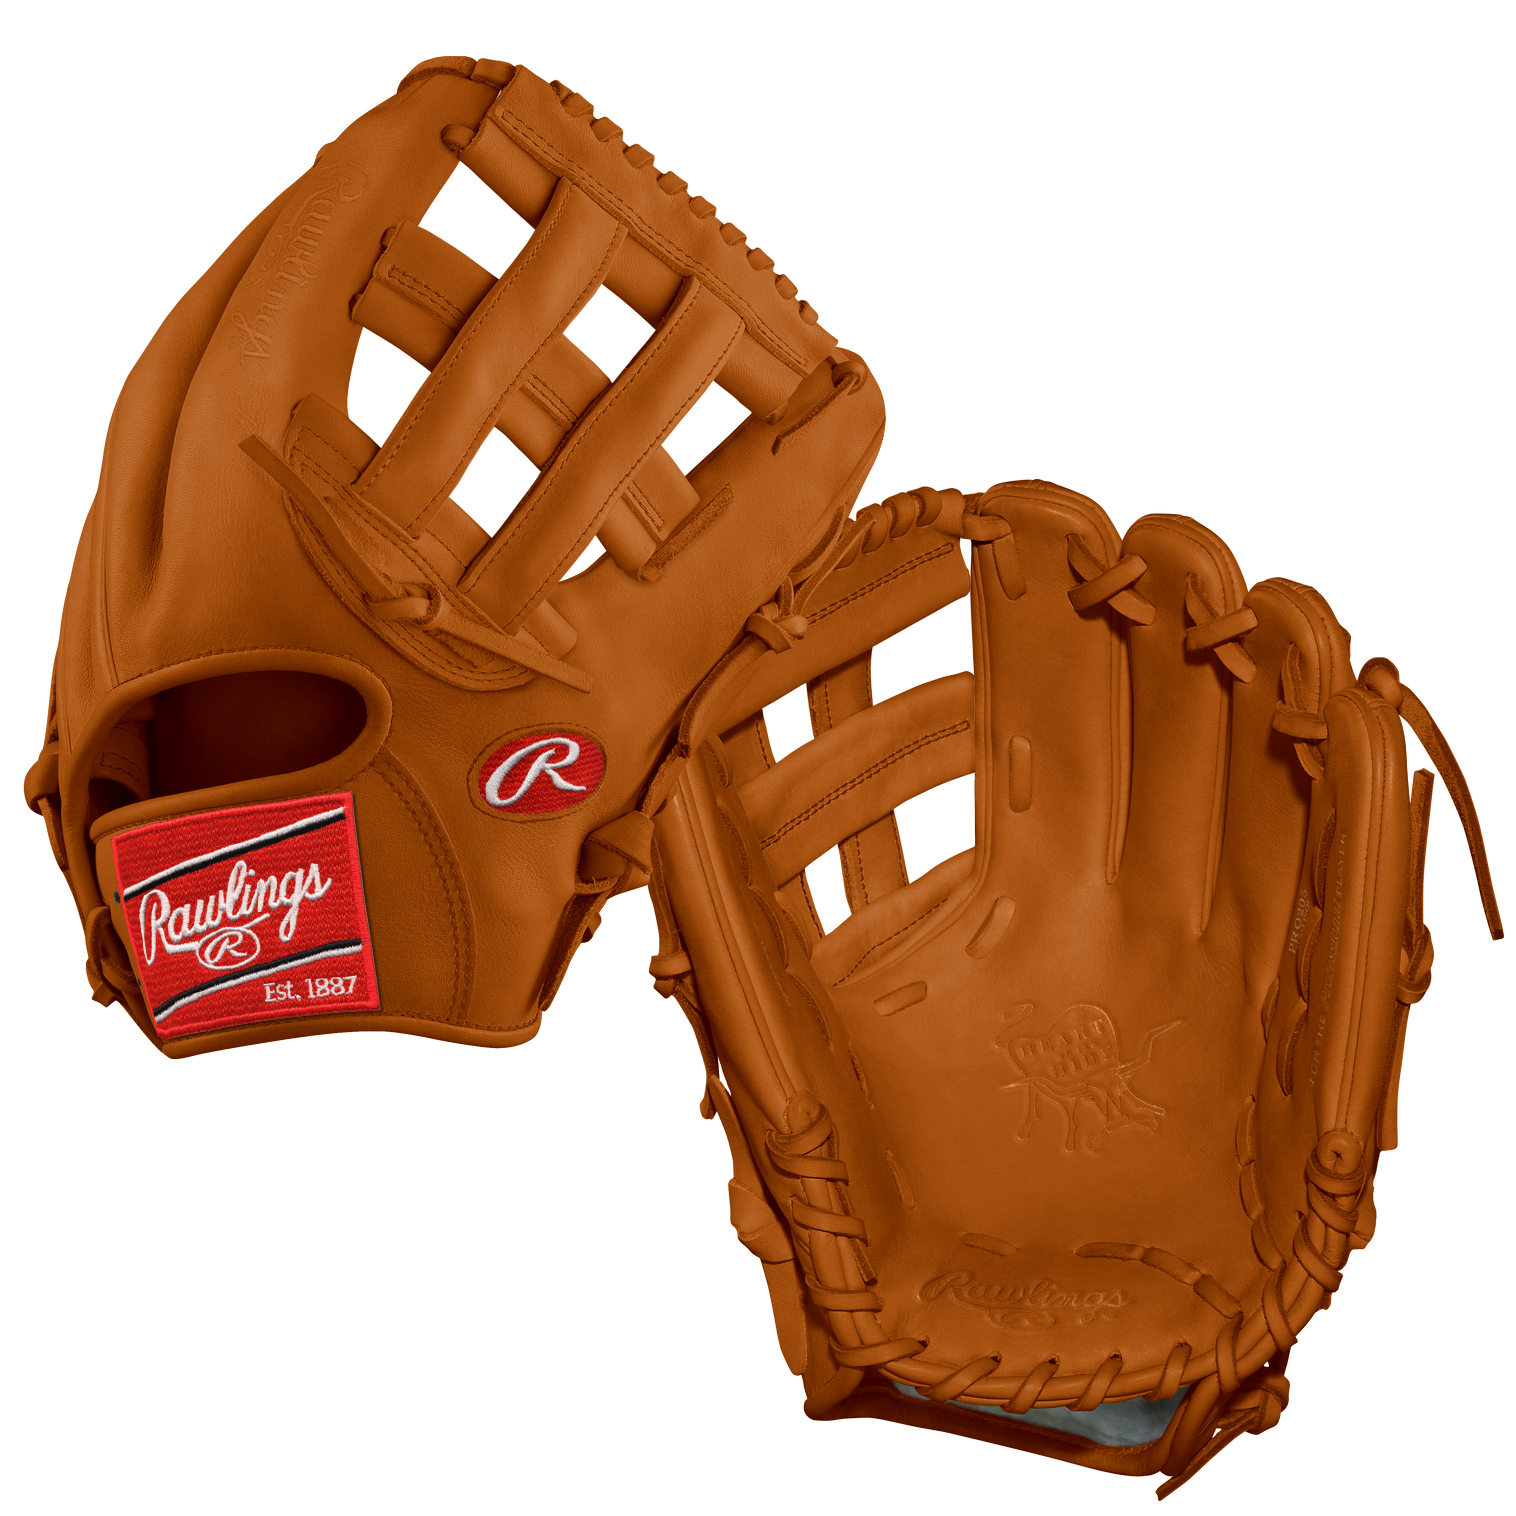       The Rawlings Heart of the Hide PRO205-6 classic tan colorway glove in the 200 pattern is a true gem for baseball enthusiasts. With its deep pocket and 11.75-inch size, this glove caters to the needs of infielders who value a longer glove for extended reach and exceptional control. Crafted with precision and expertise, the Heart of the Hide series ensures superior durability and performance, thanks to its top-grain leather construction.   Pattern 205 Sport Baseball Leather Heart of the Hide Fit Standard Throwing Hand Right-Hand Throw Position Infield Size 11 3/4 Web Pro H Logo Patch White on Scarlet Leather Tan Tan Laces Lining Tan Welting Palm Tan Welting Back Tan Binding Tan Tan Stitching Stamping Indent Heel Pad Full Wrist Lining Thermo Formed Break-In Standard       